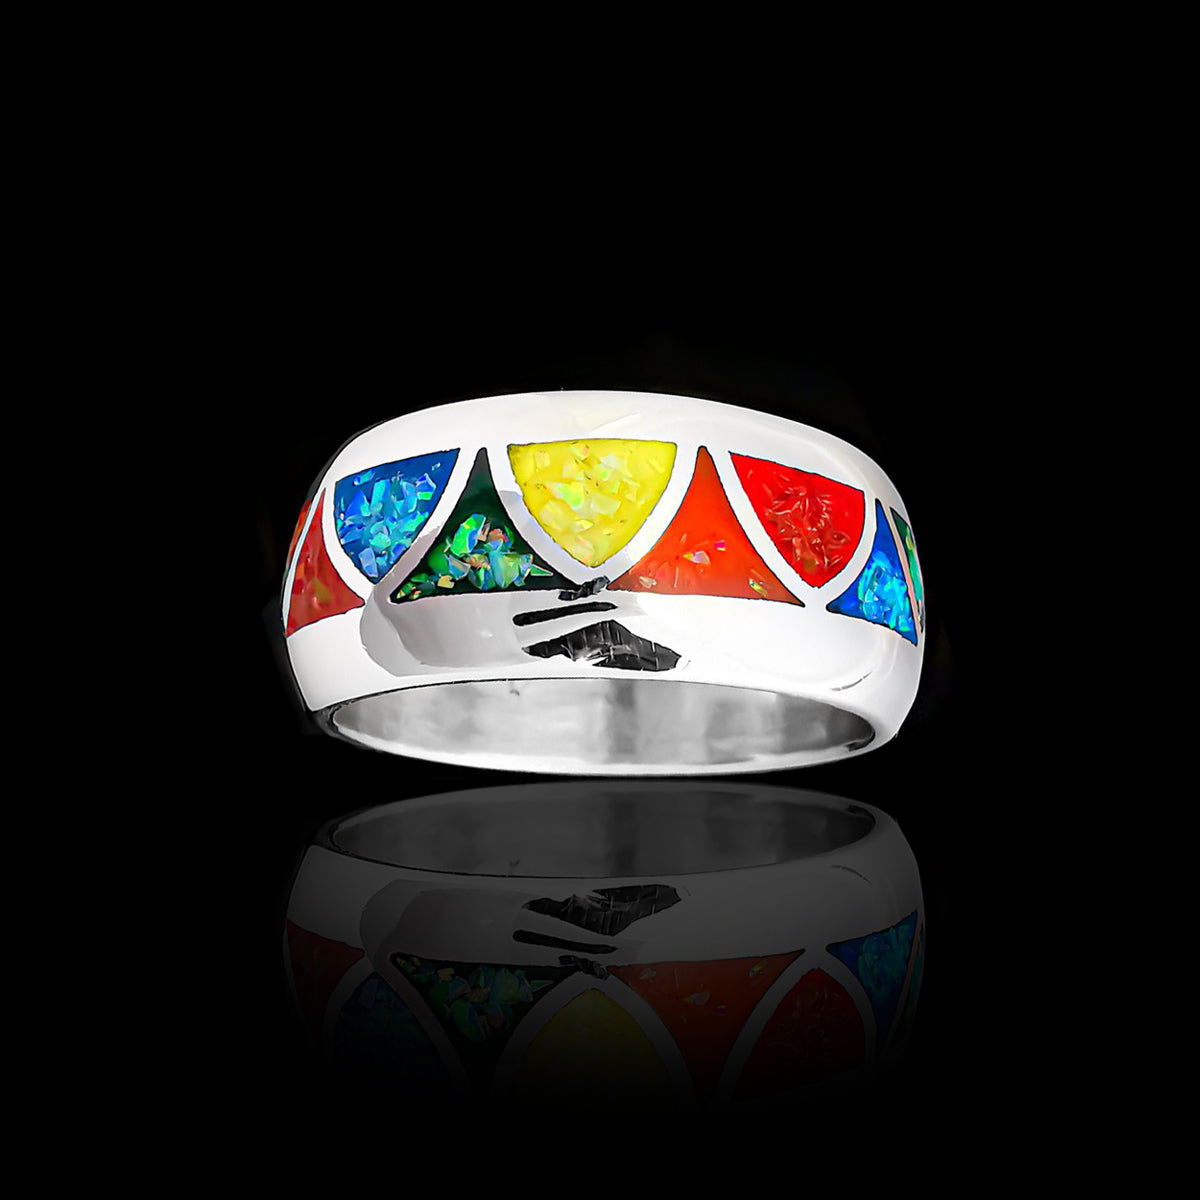 vitelpharma's Wide Band Rainbow Pride Triangles Ring, handcrafted in sterling silver is inlaid with red, orange, yellow, green, and blue opals in a rainbow pattern